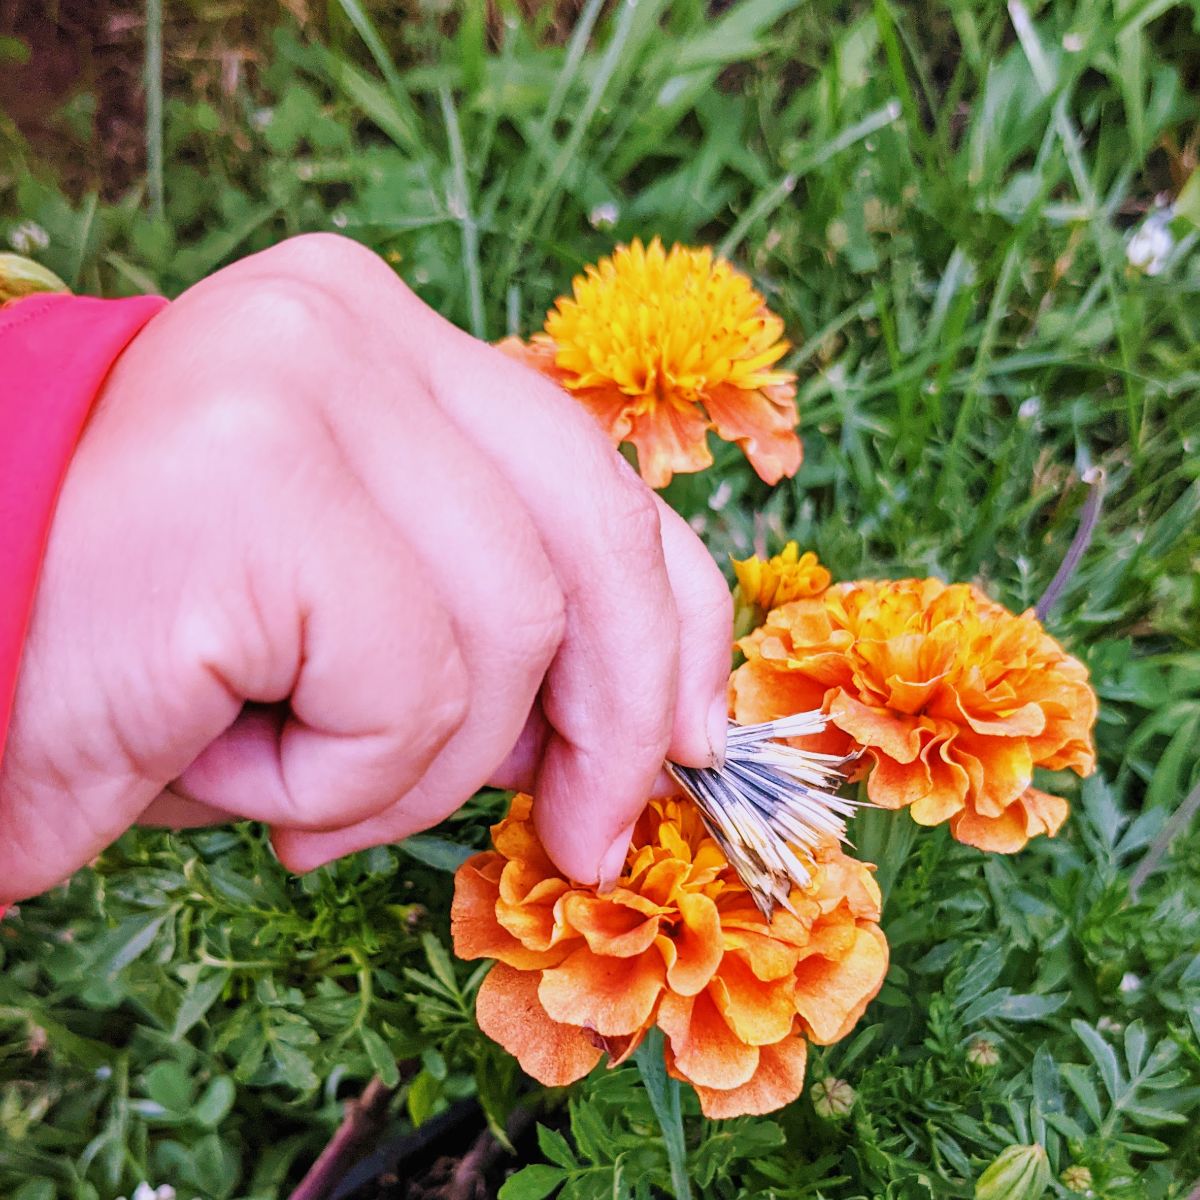 Young girl's hand holding marigold seeds next to strawberry blonde marigolds in the grass